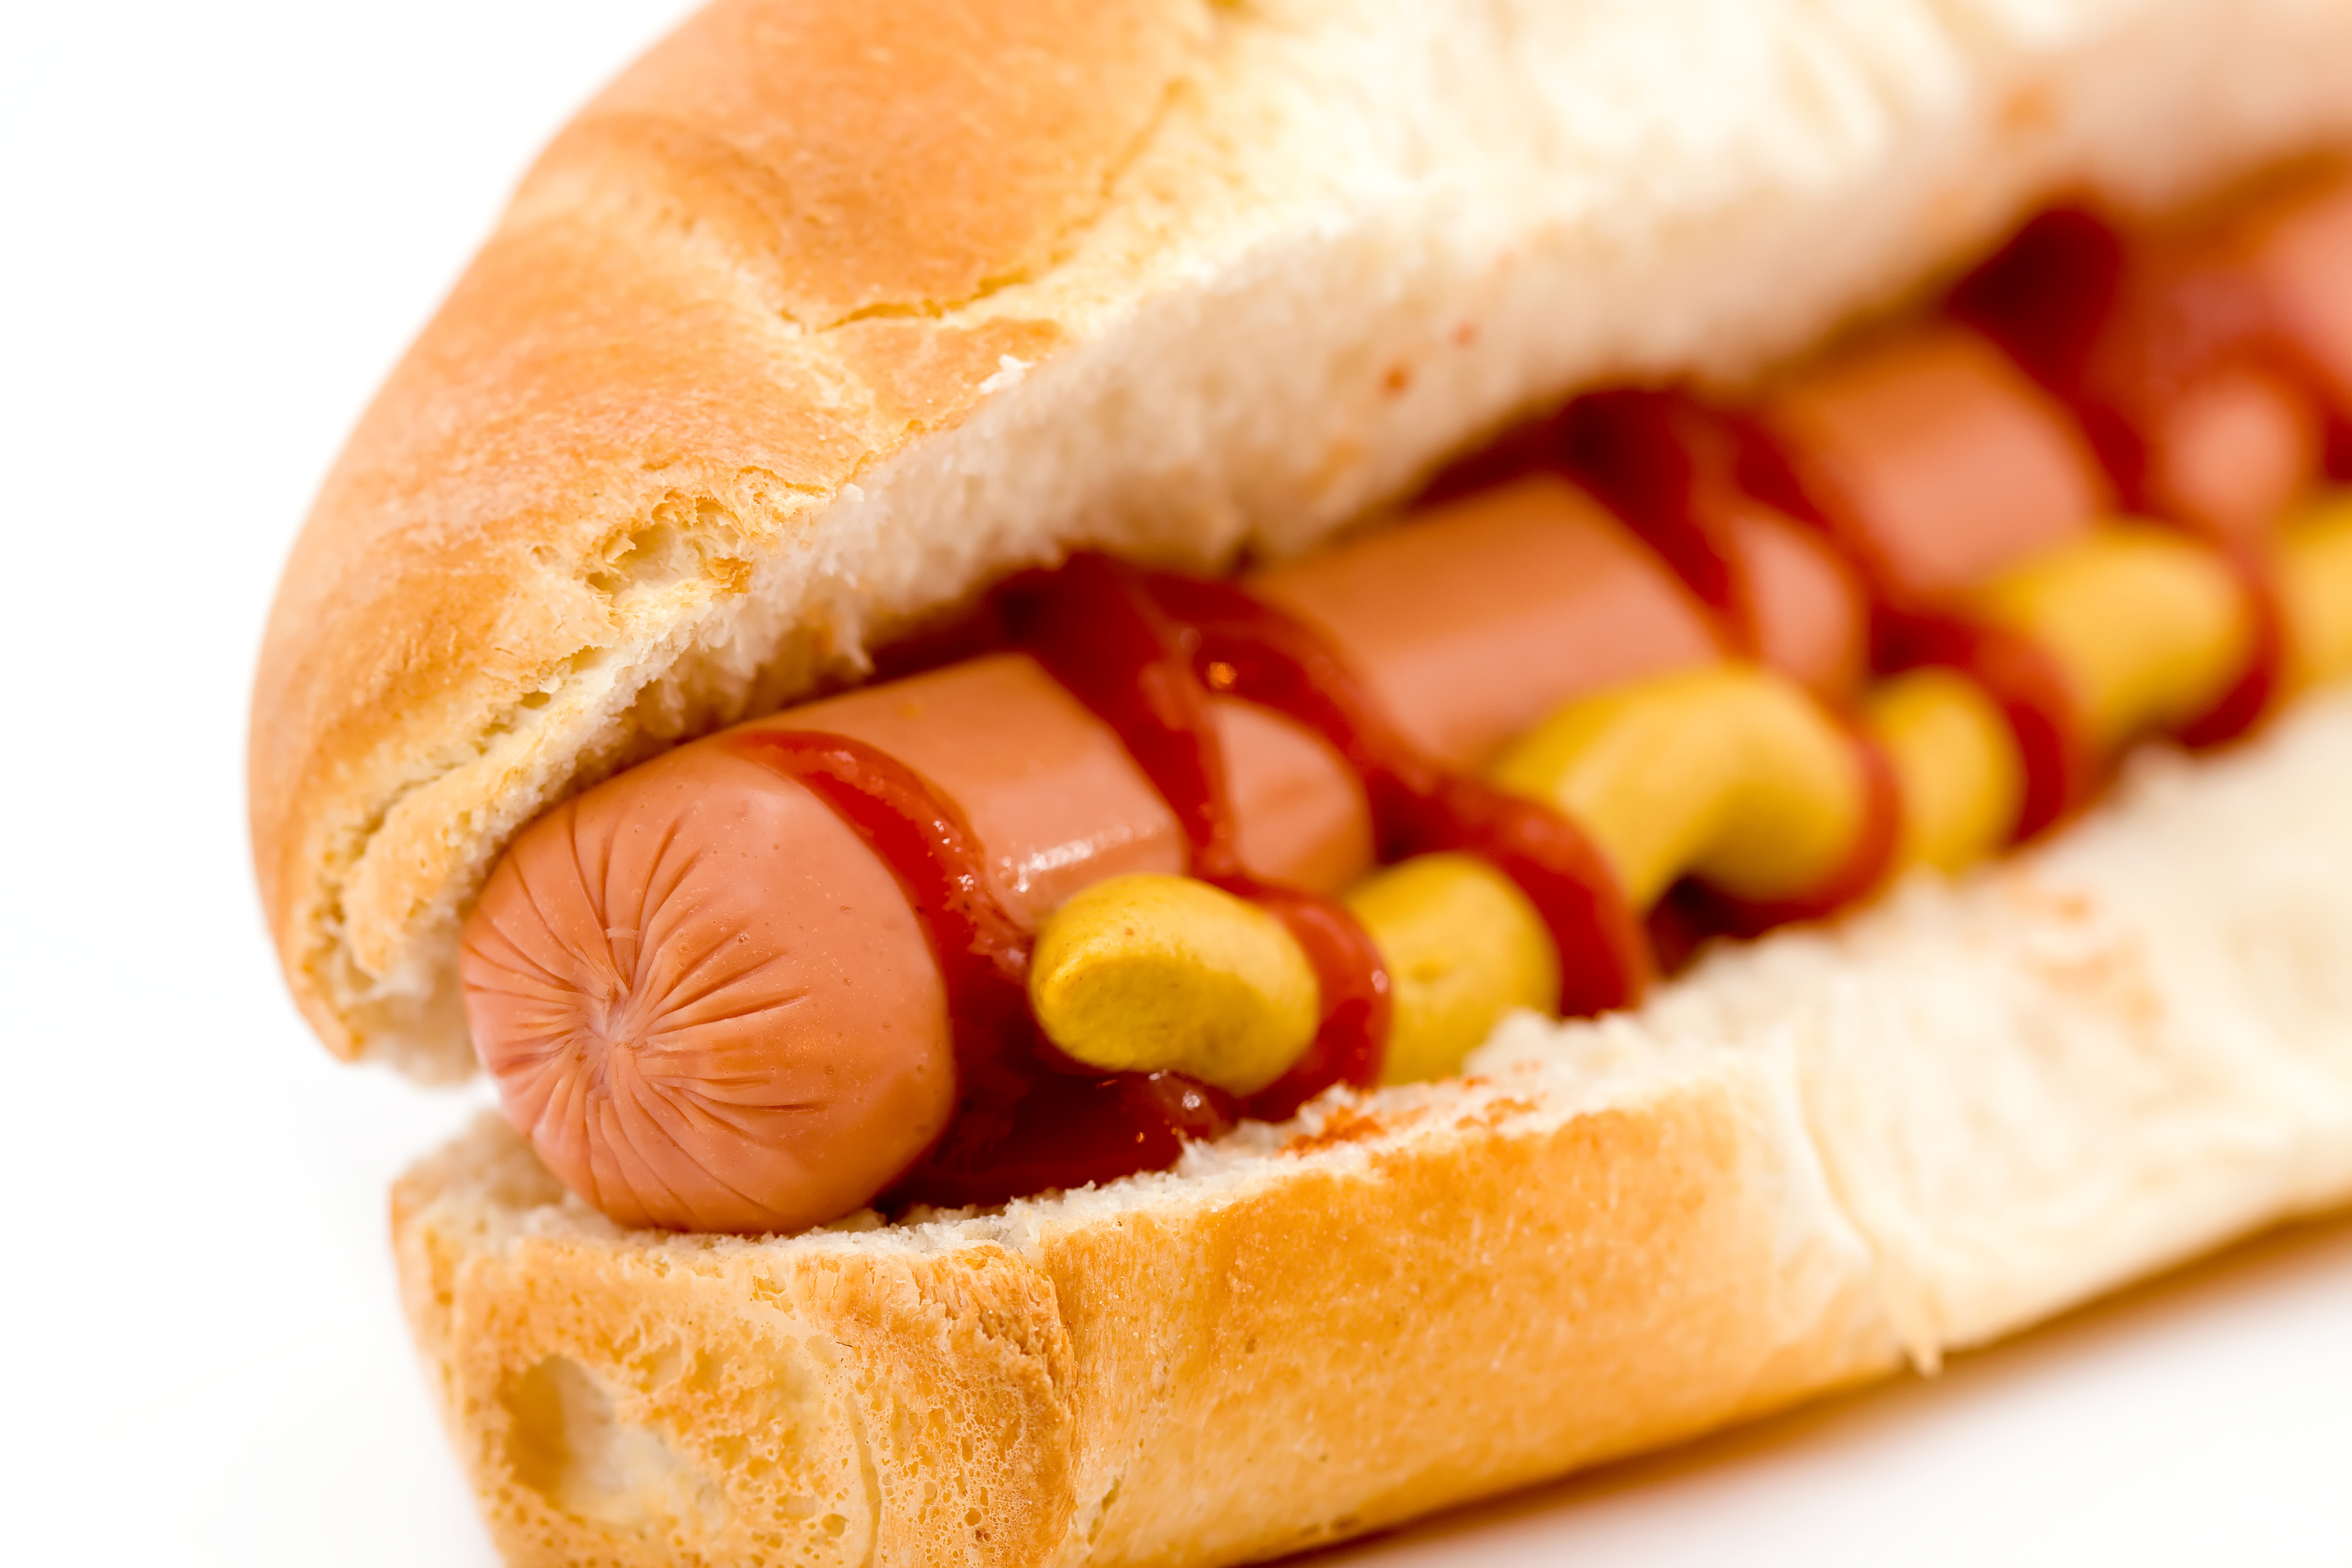 What Is Really In a Hot Dog? - Chico Locker &amp; Sausage Co. Inc.Chico ...